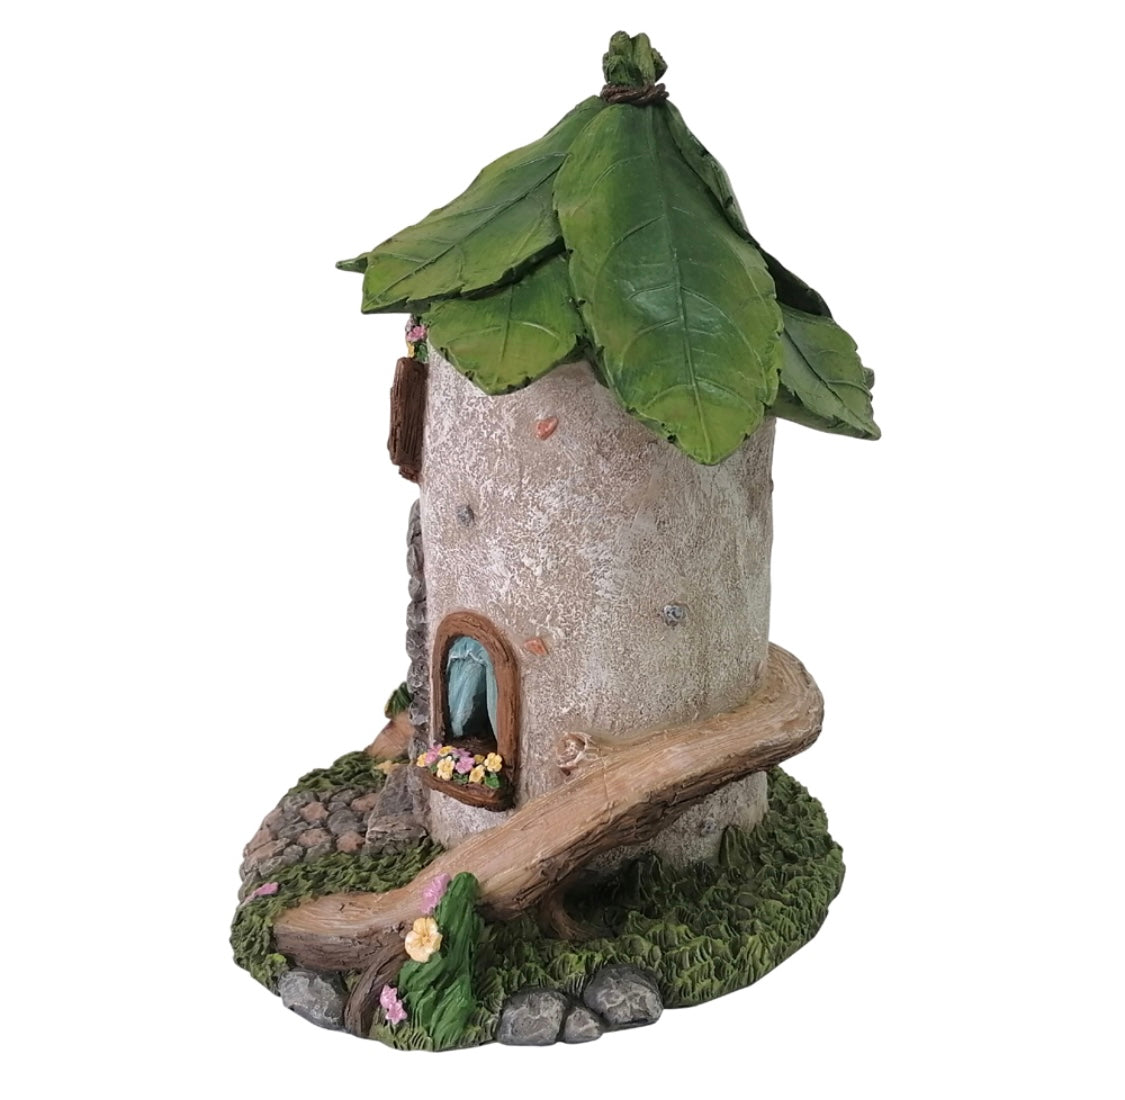 The Enchanted Wood Cottage